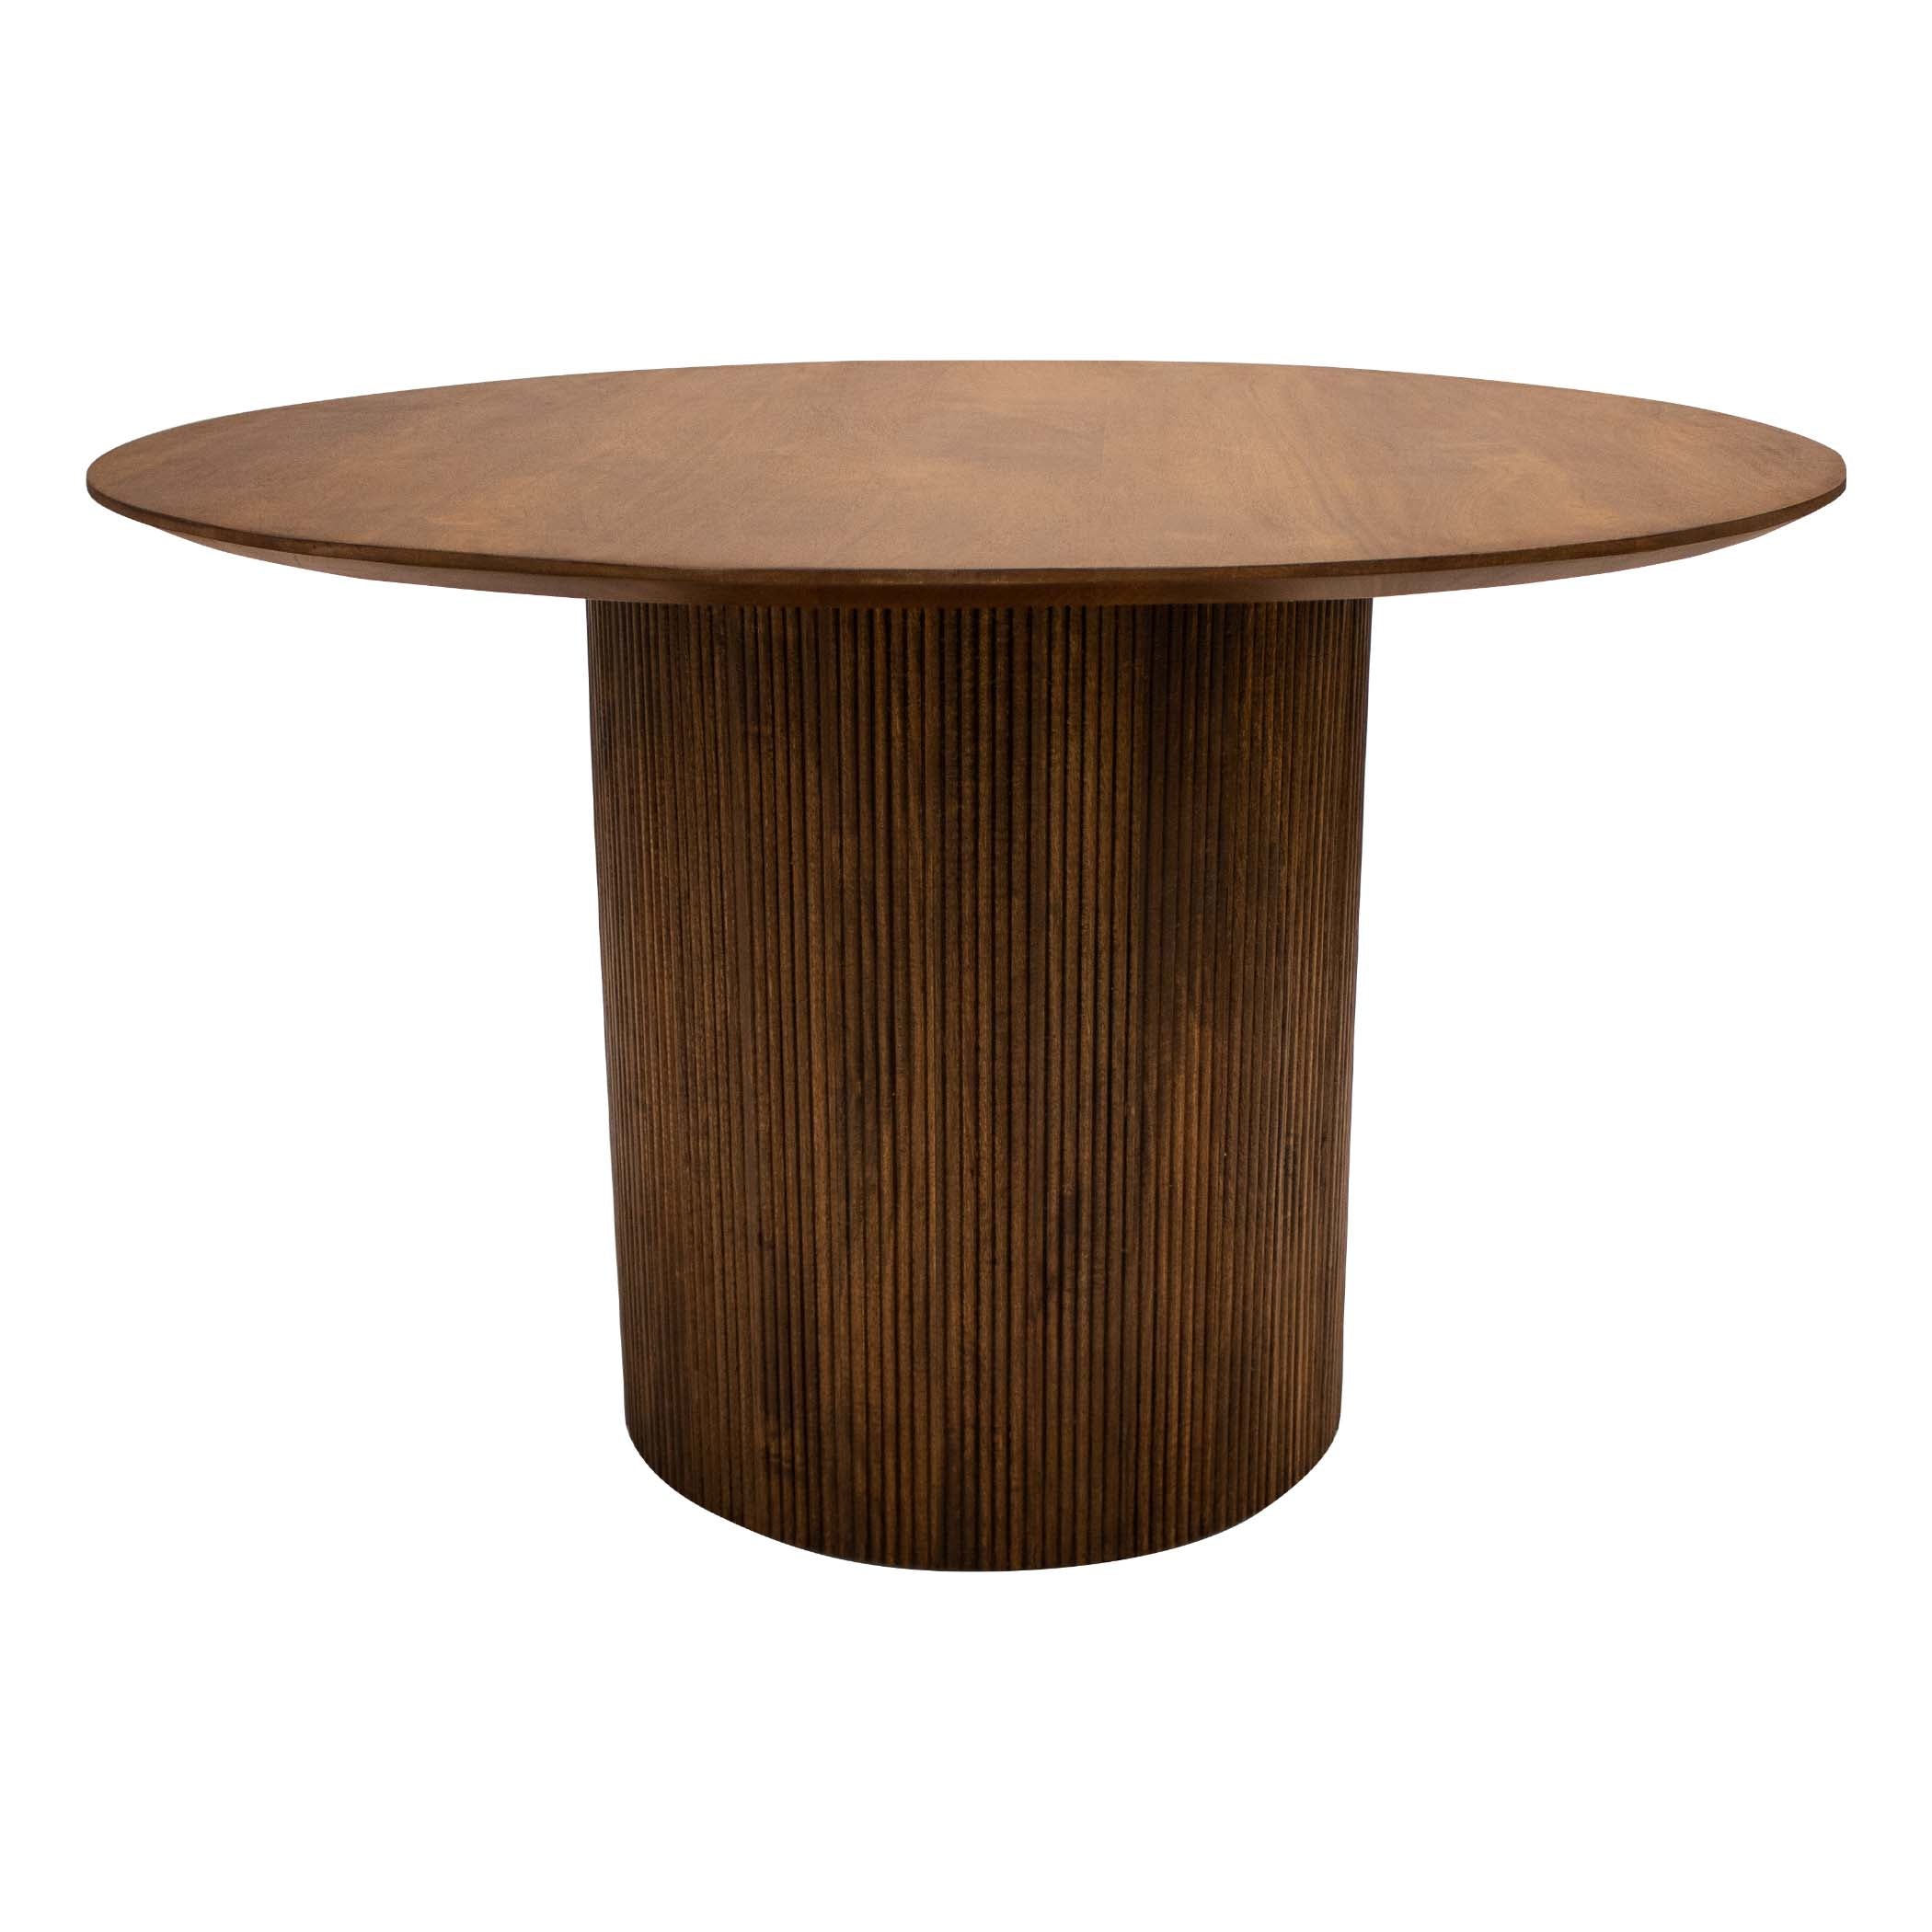 Kick dining table Vince round - 120cm